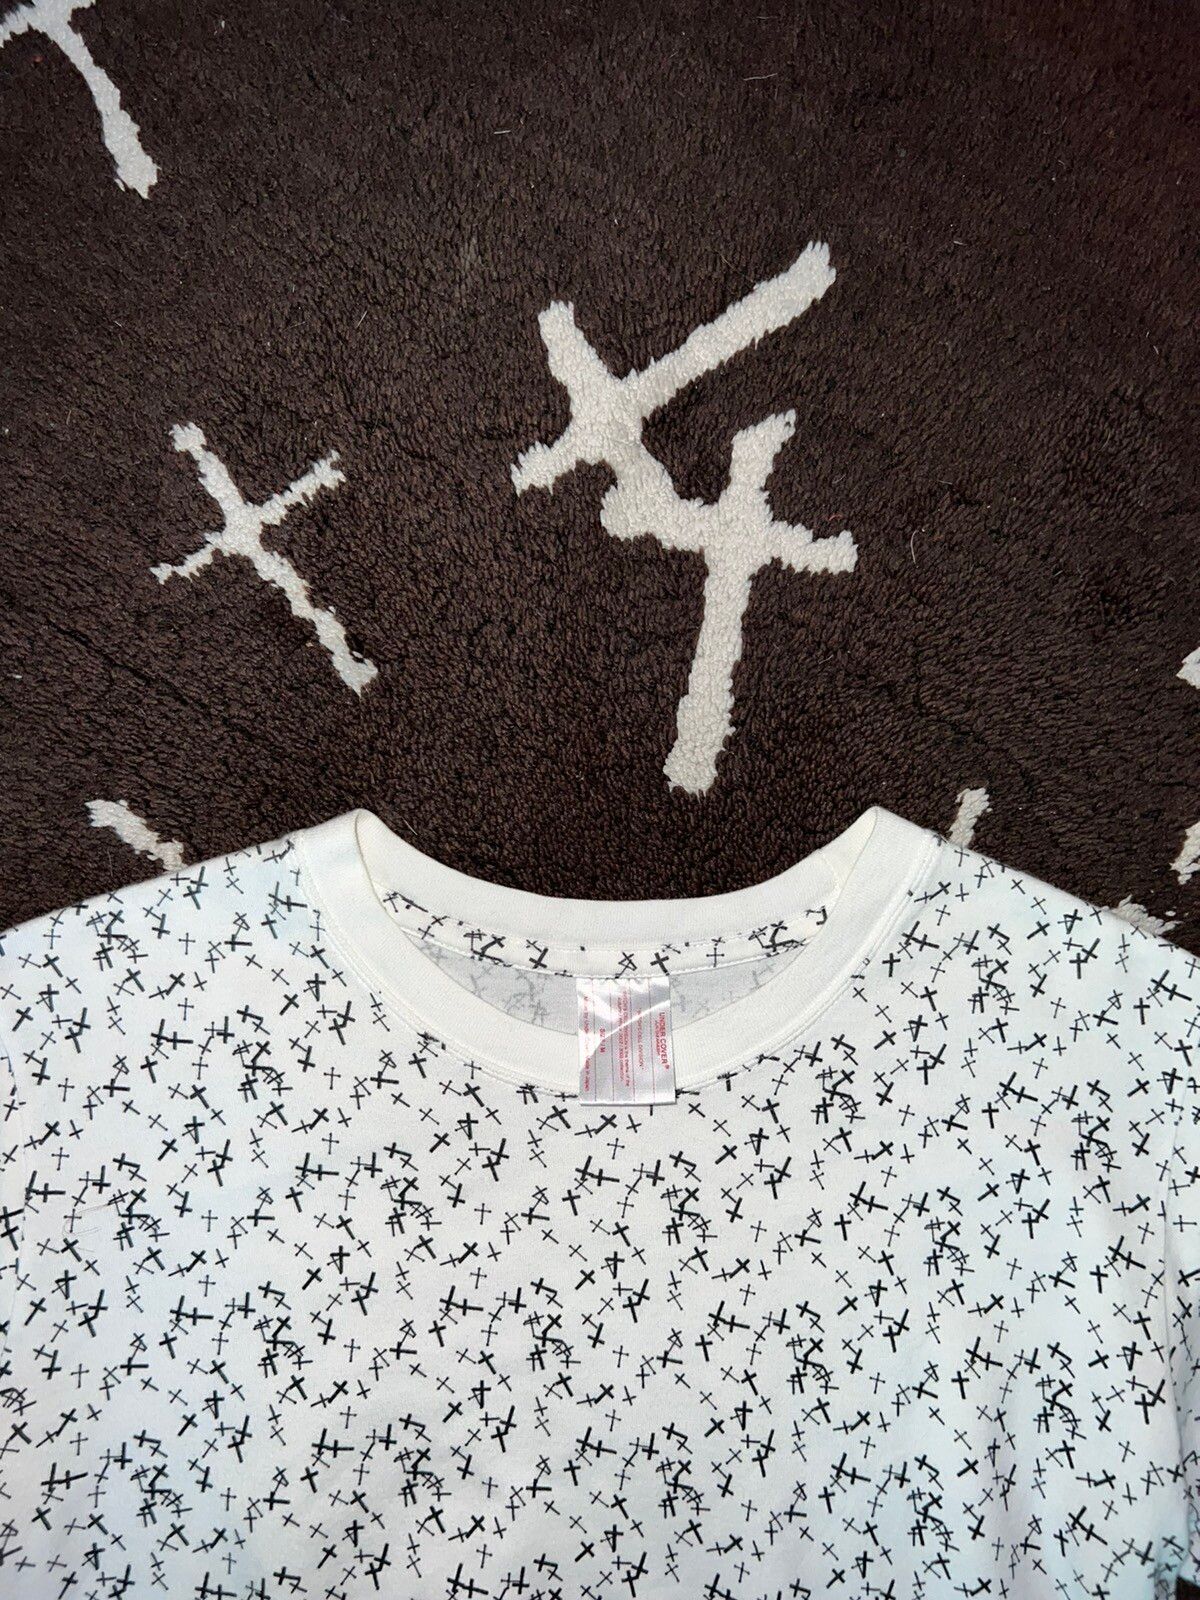 Undercover aw02 Witches Cell Division Crosses Tee Size US M / EU 48-50 / 2 - 2 Preview